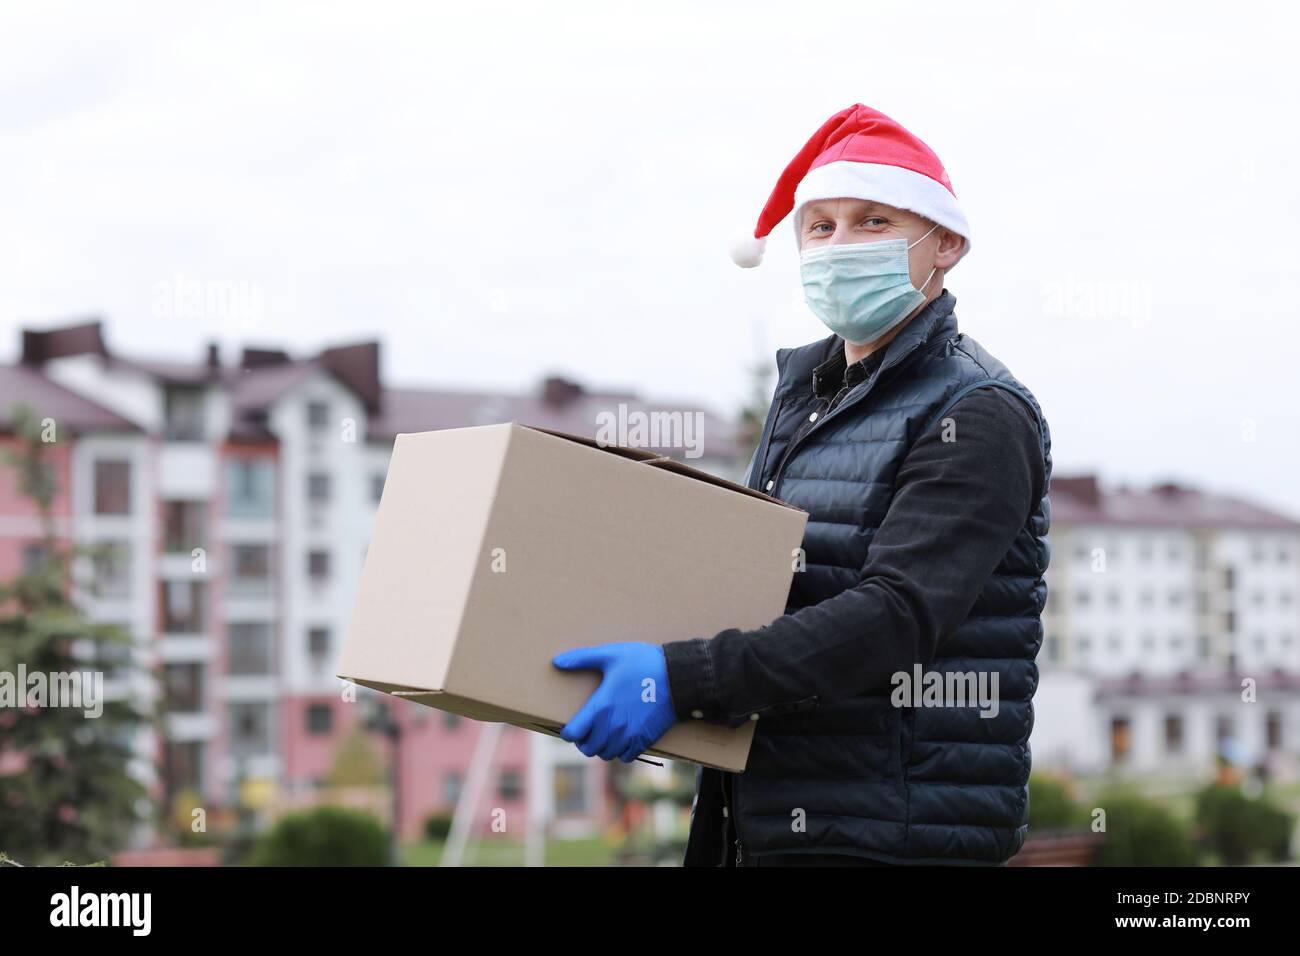 Delivery man in protective mask, gloves and santa's hat holding